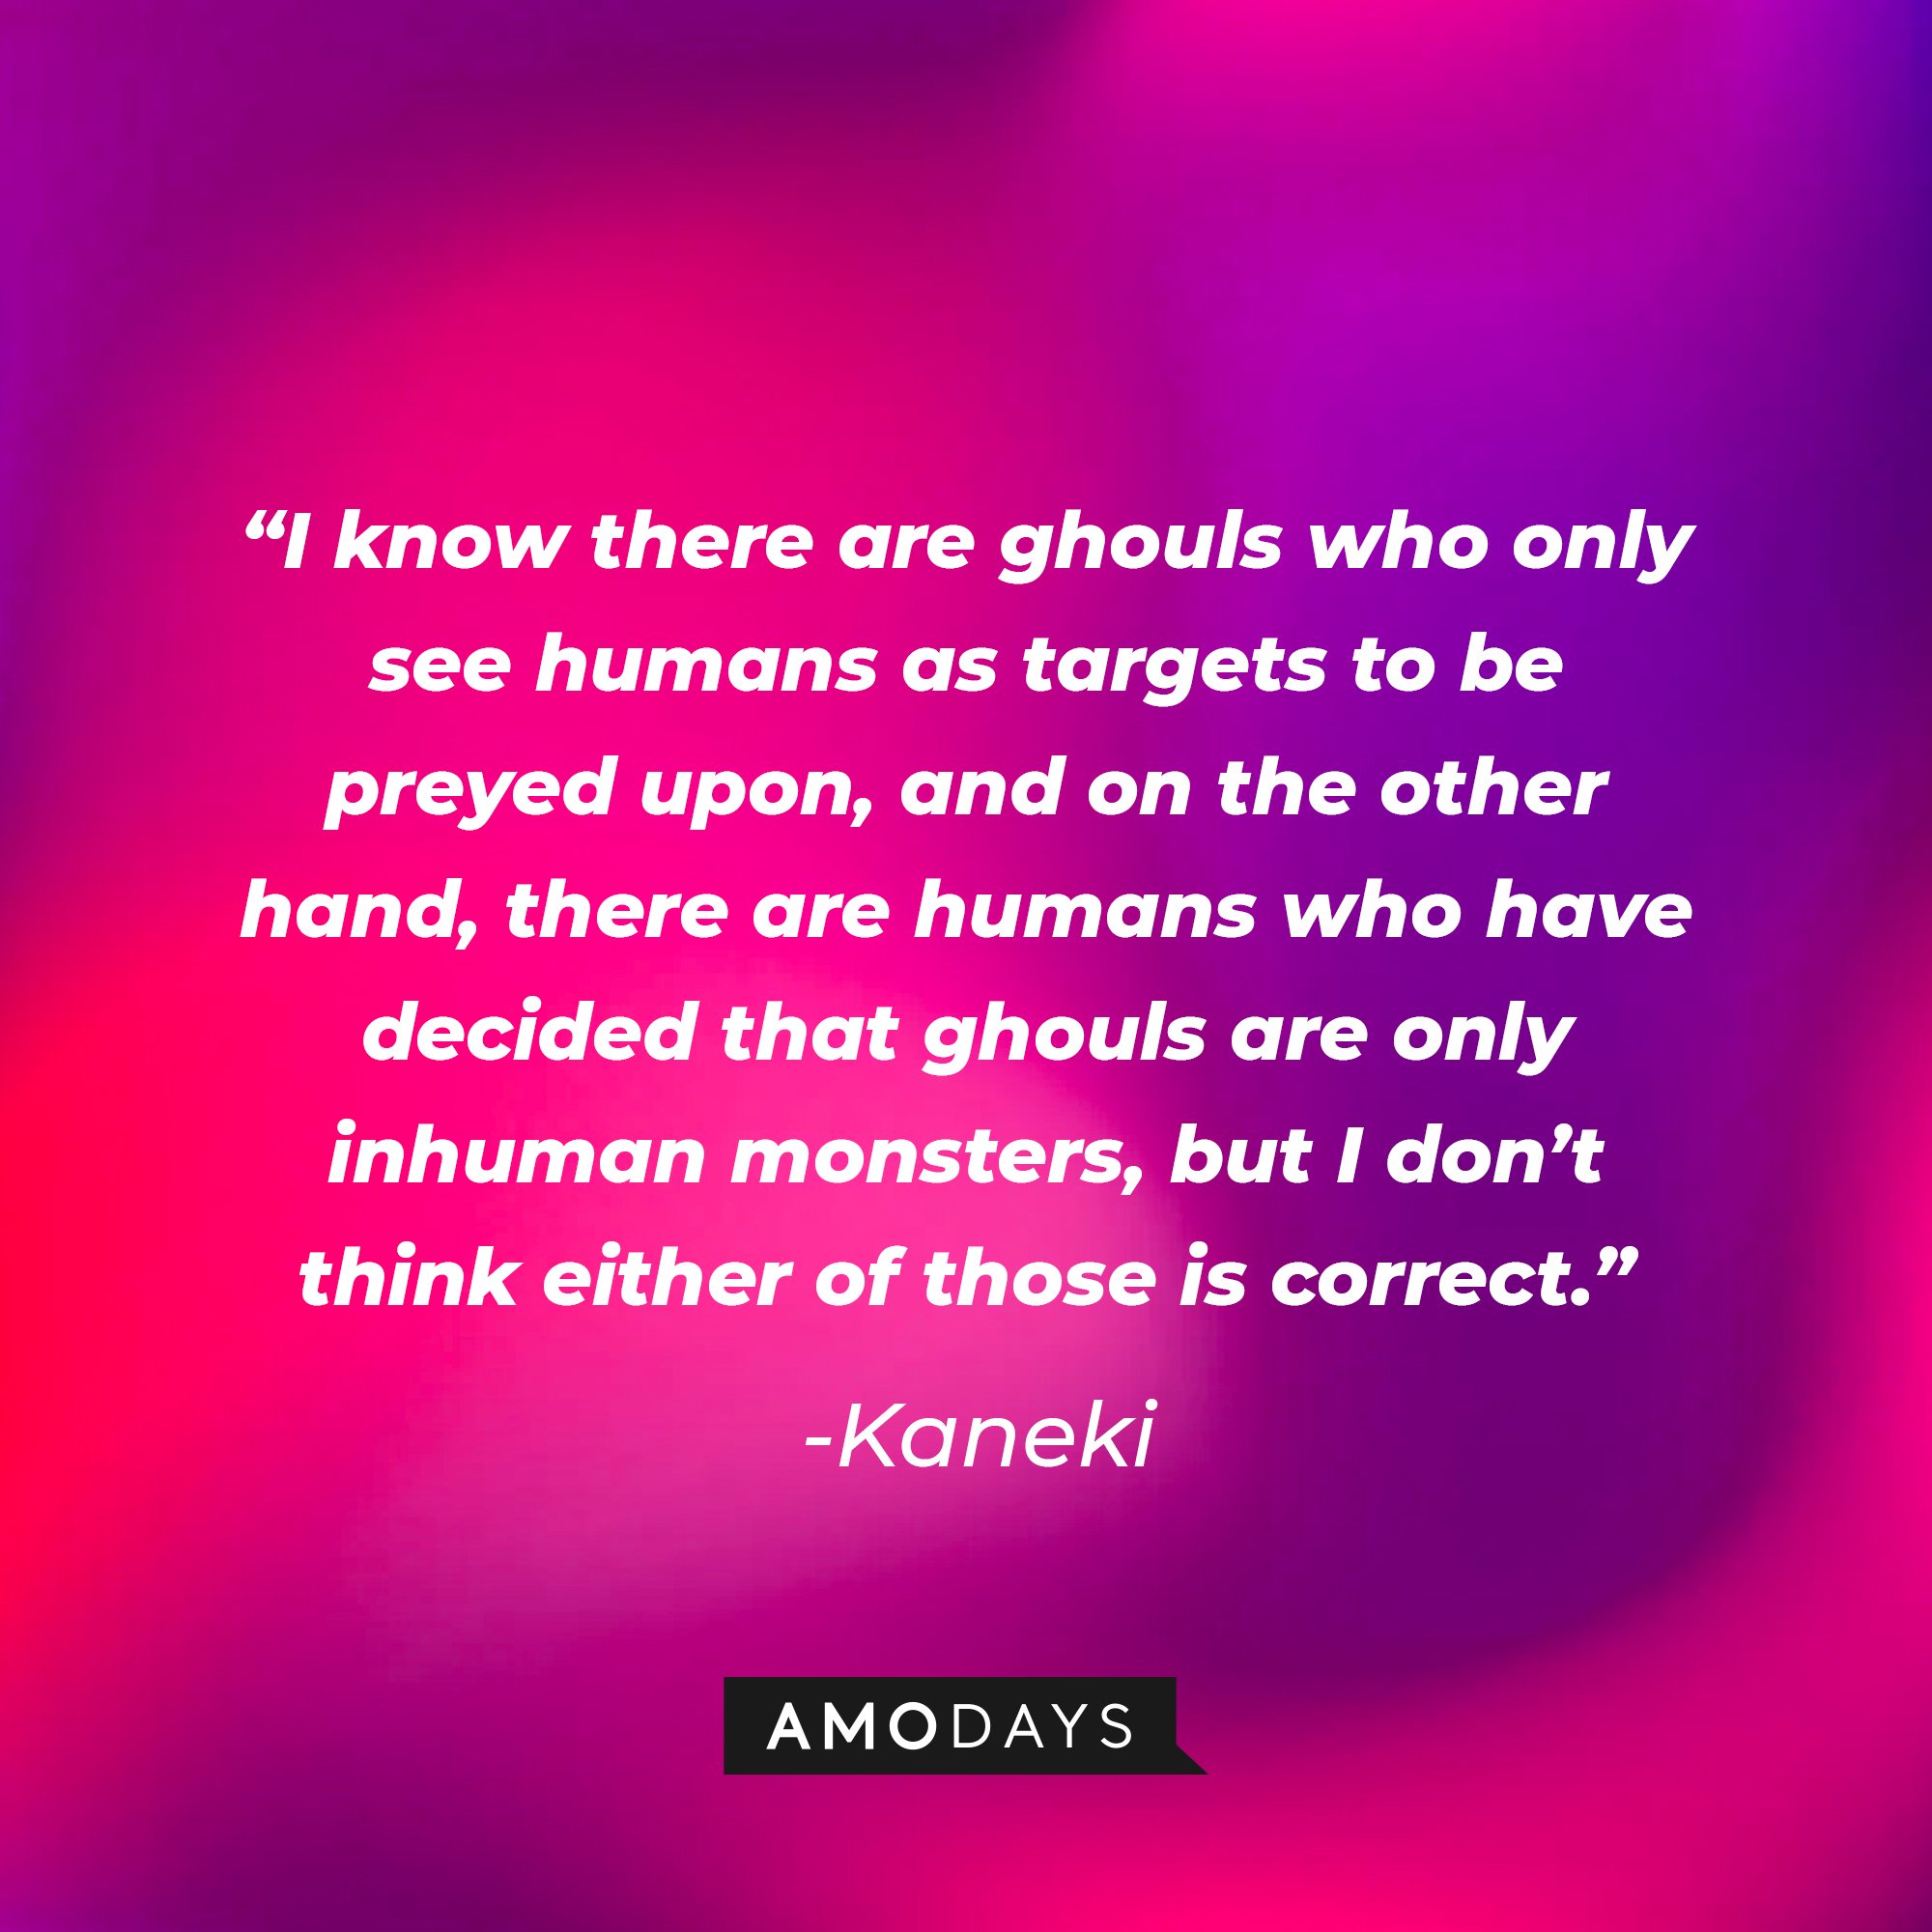 Kaneki's quote: “I know there are ghouls who only see humans as targets to be preyed upon, and on the other hand, there are humans who have decided that ghouls are only inhuman monsters, but I don’t think either of those is correct.” | Image: AmoDays